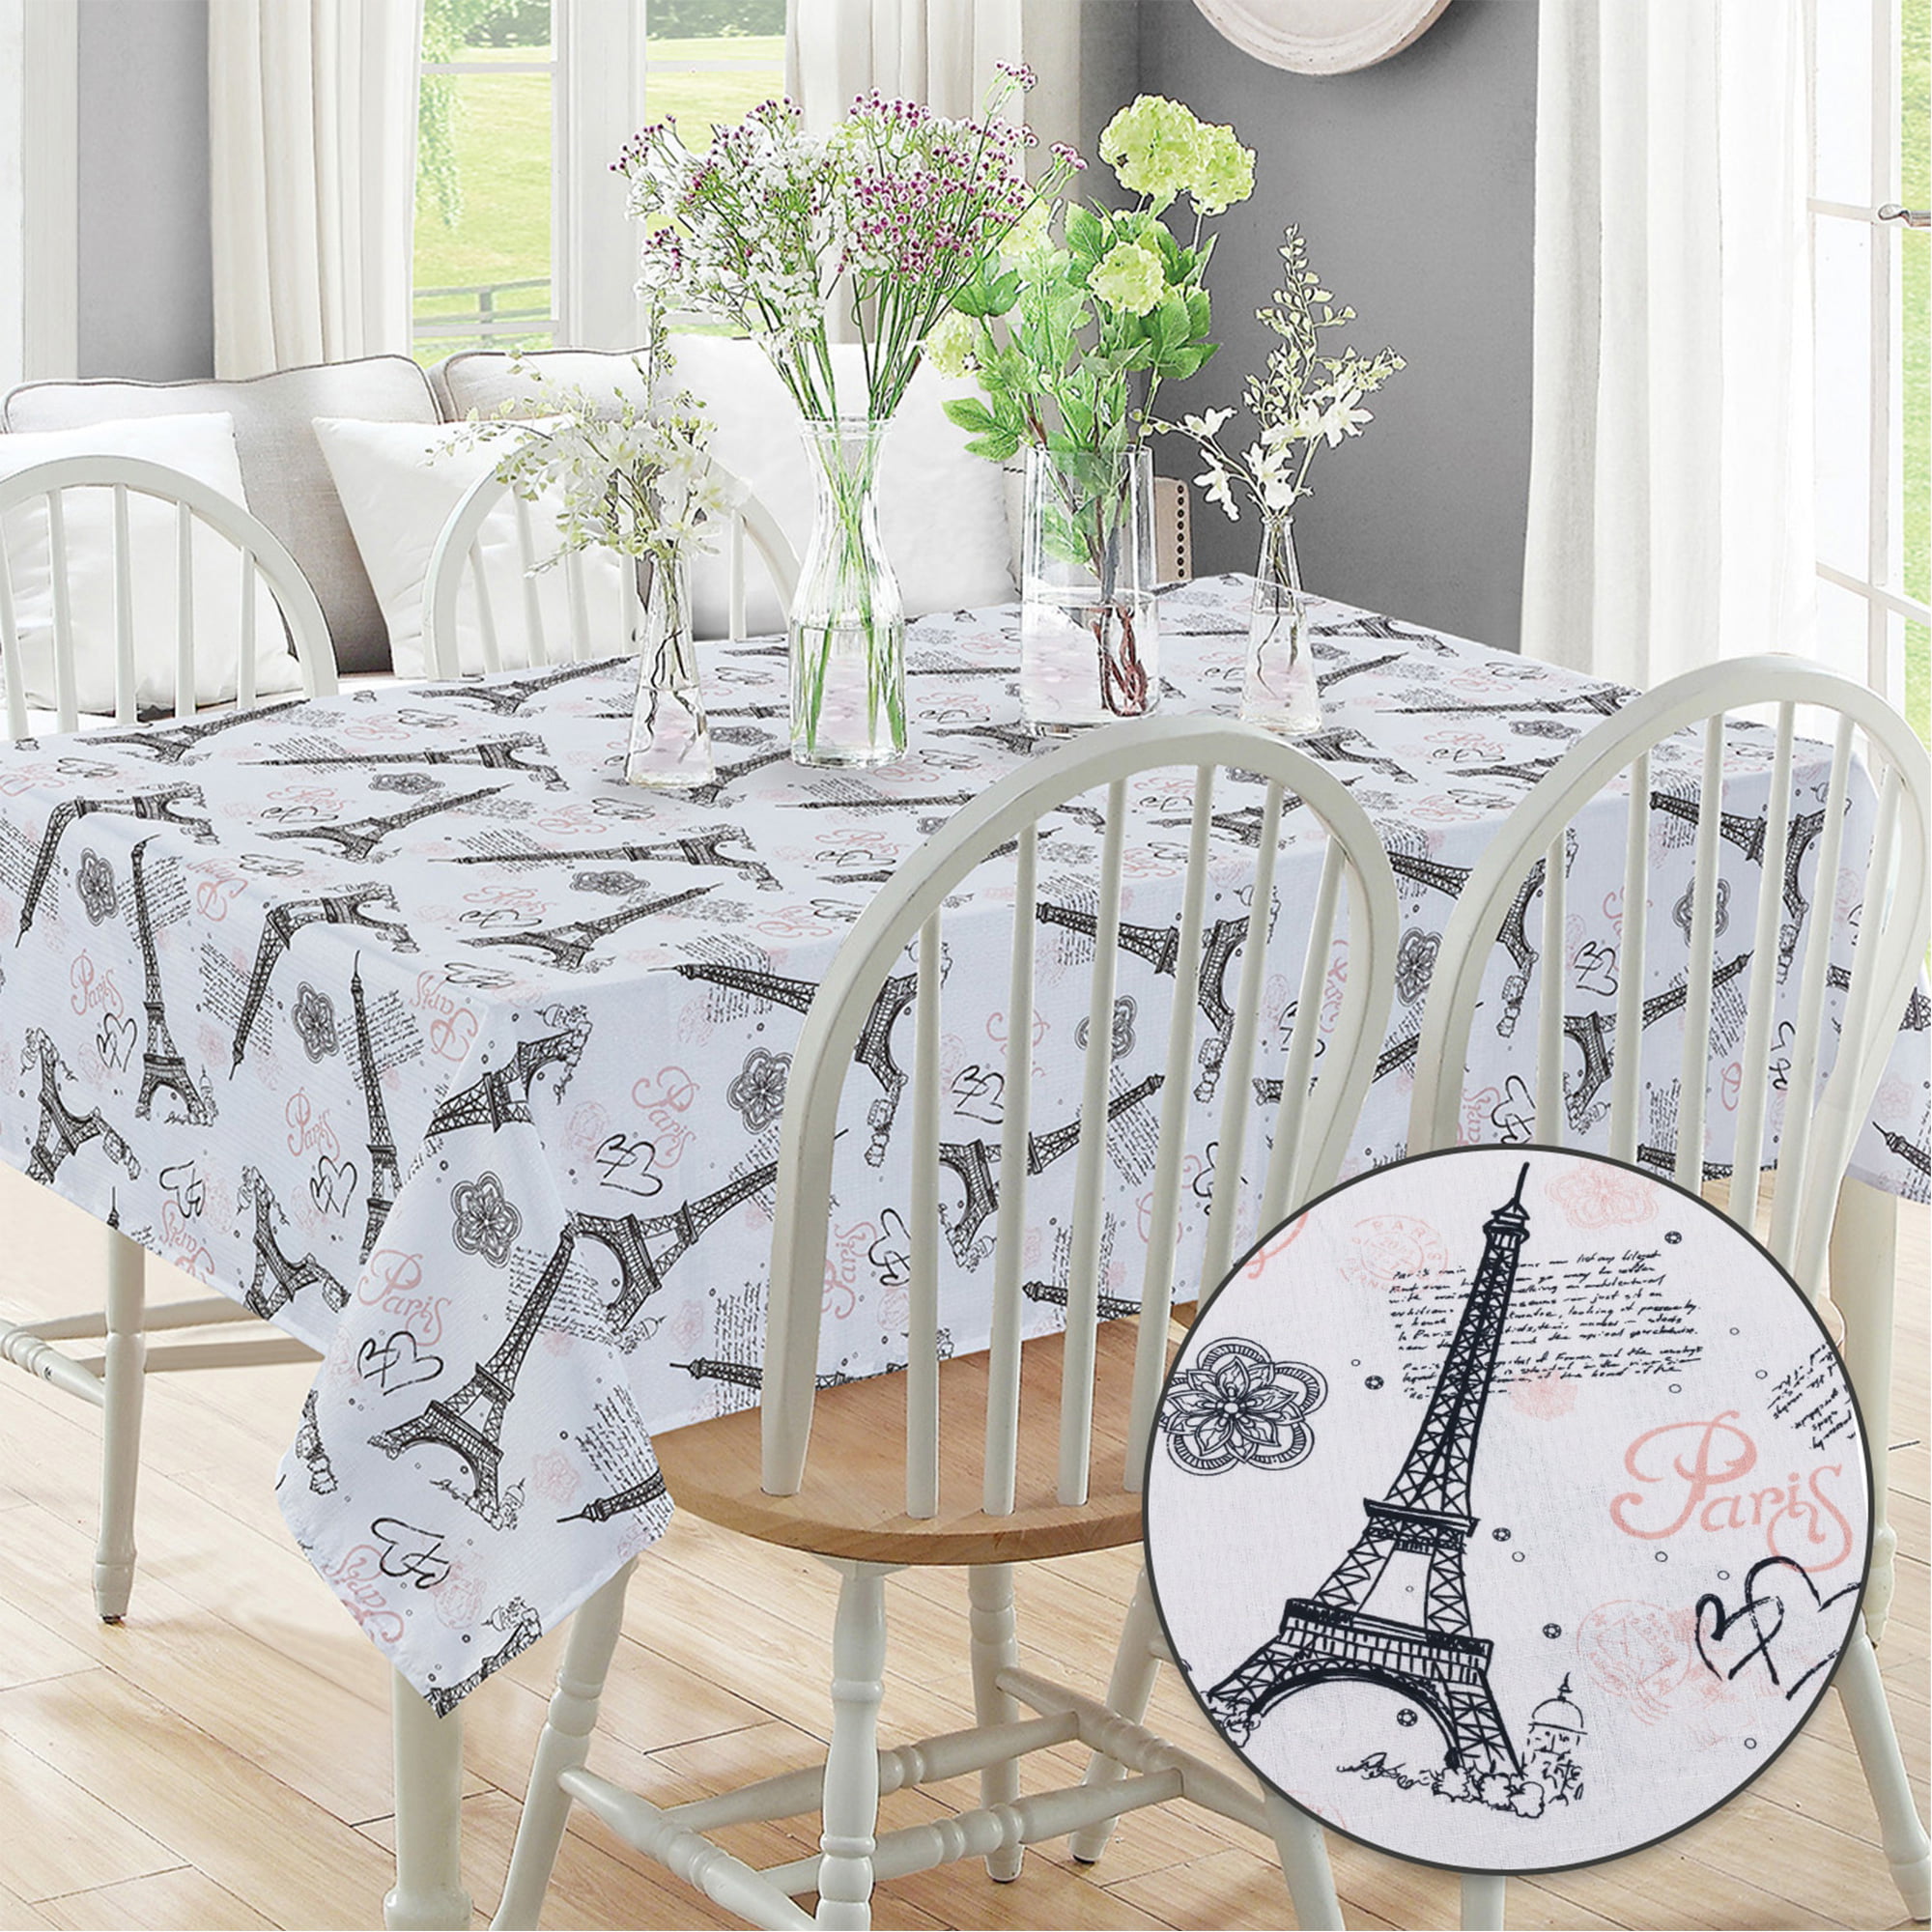 Tablecloth Cooking Anti Stain Wax PVC Hearts Shabby Chic Table Pad on size 